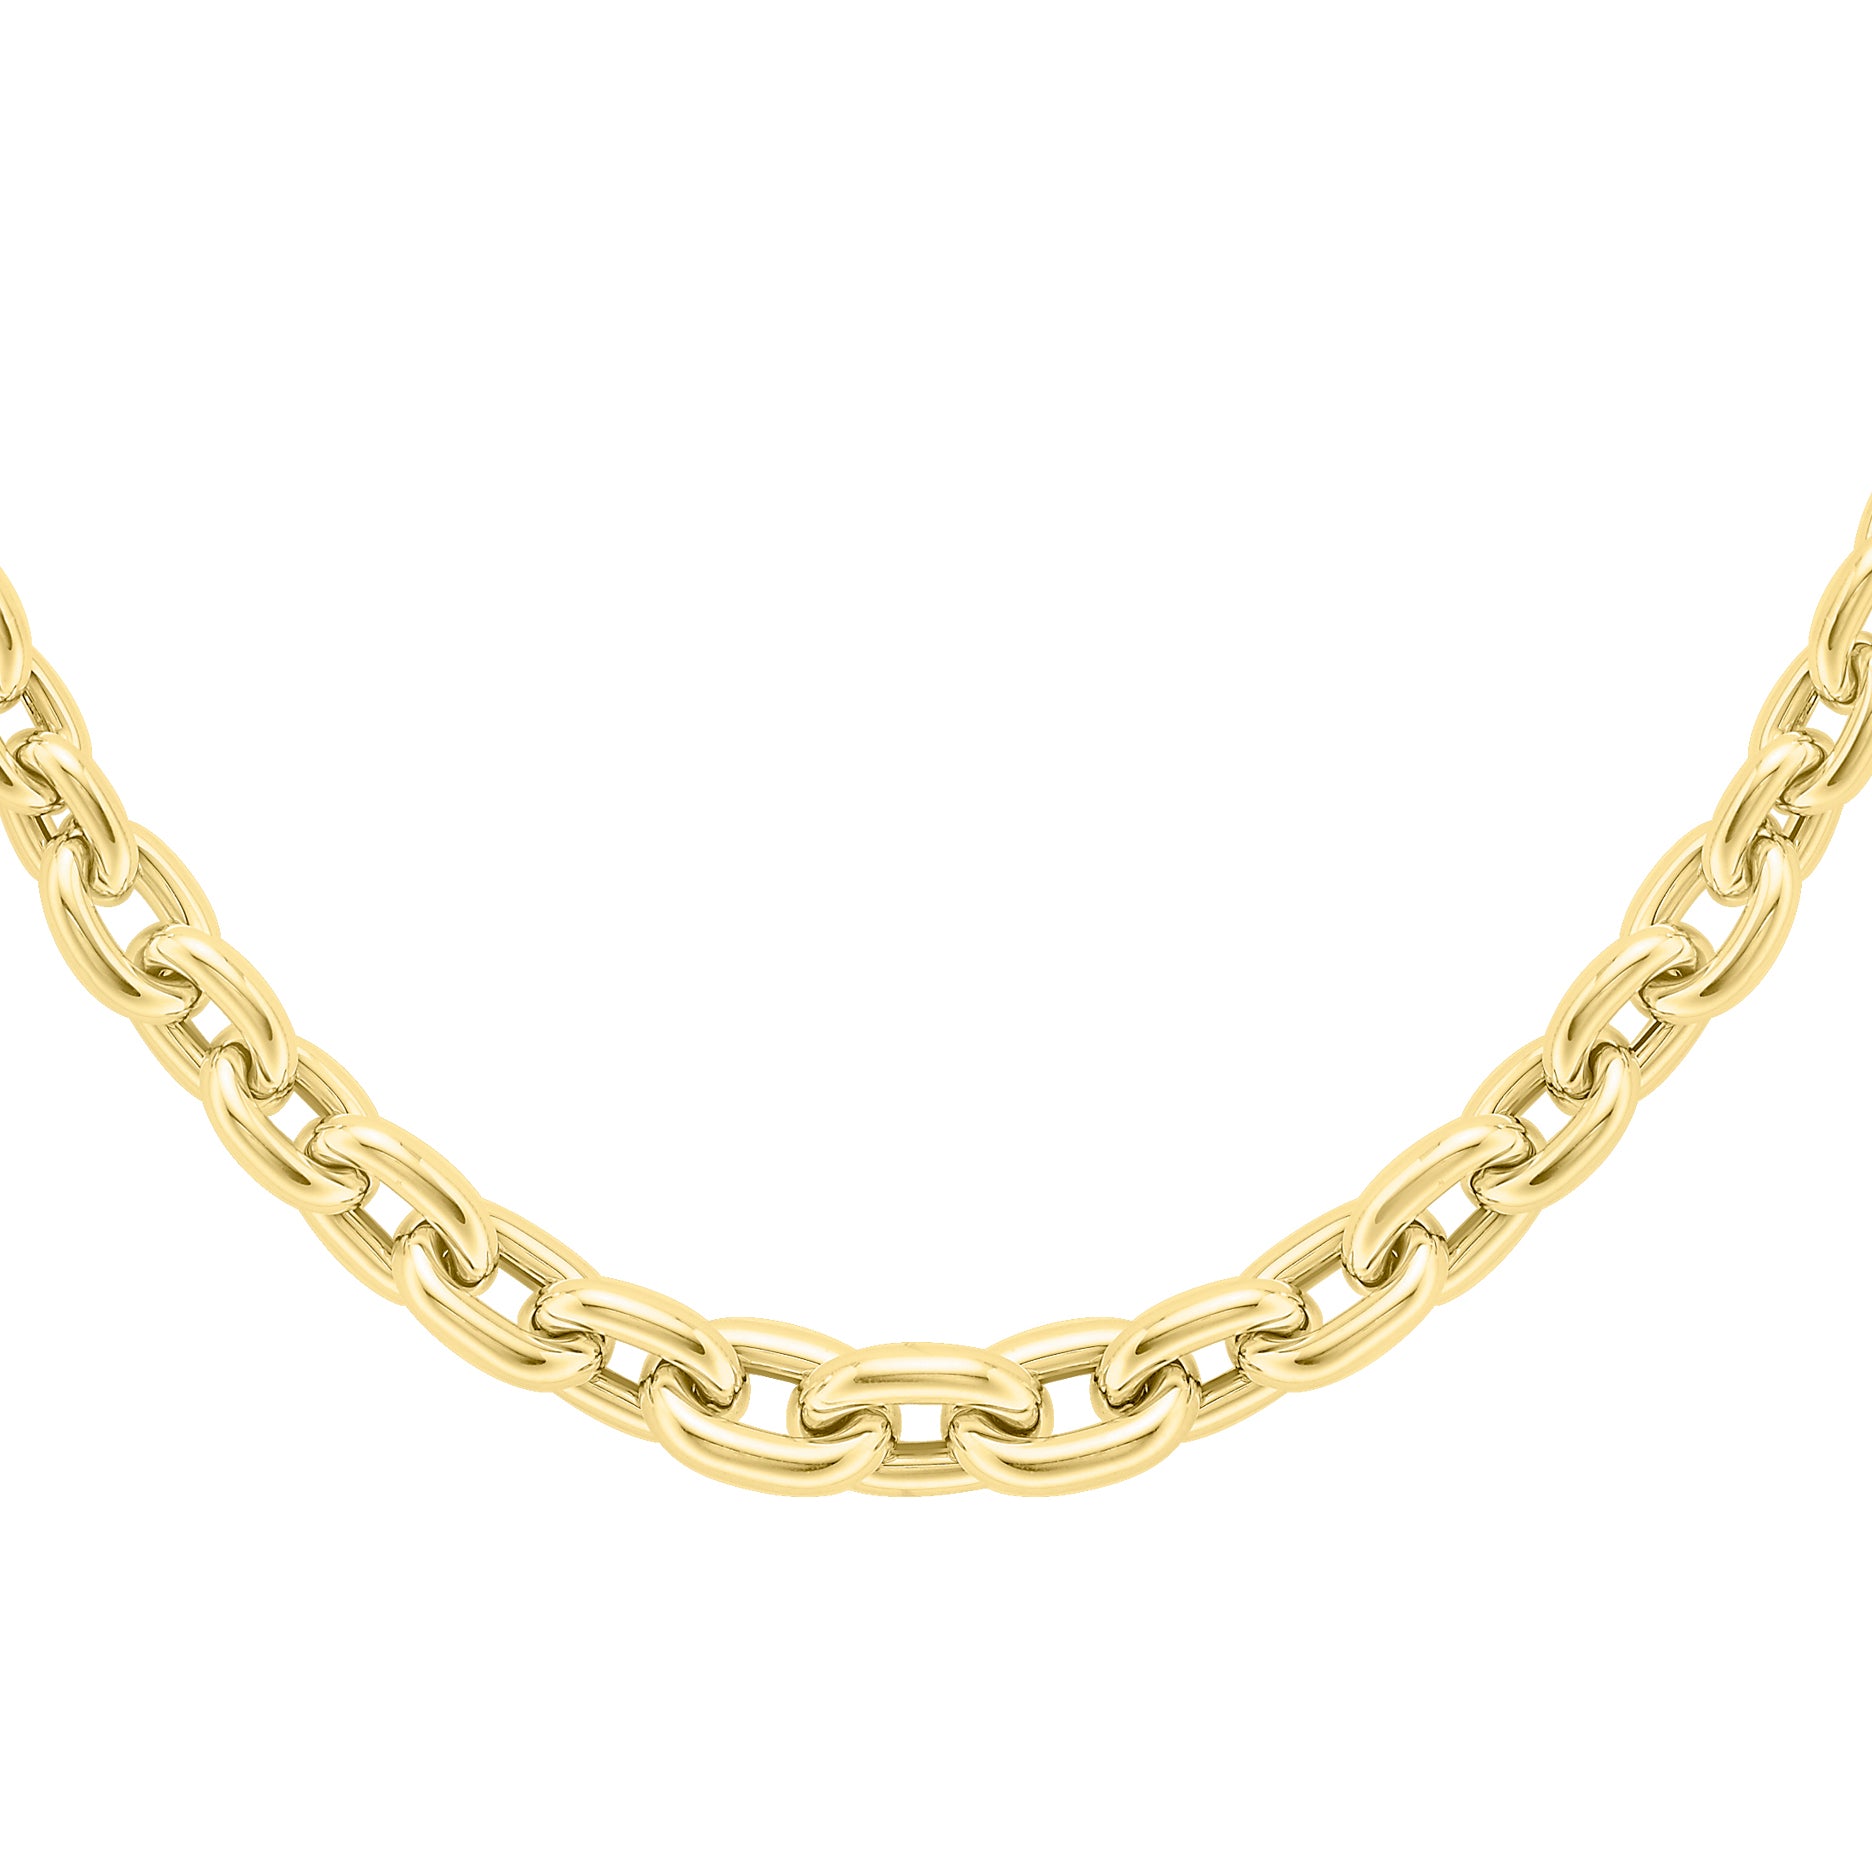 9ct. Yellow Gold Fancy Link Necklace